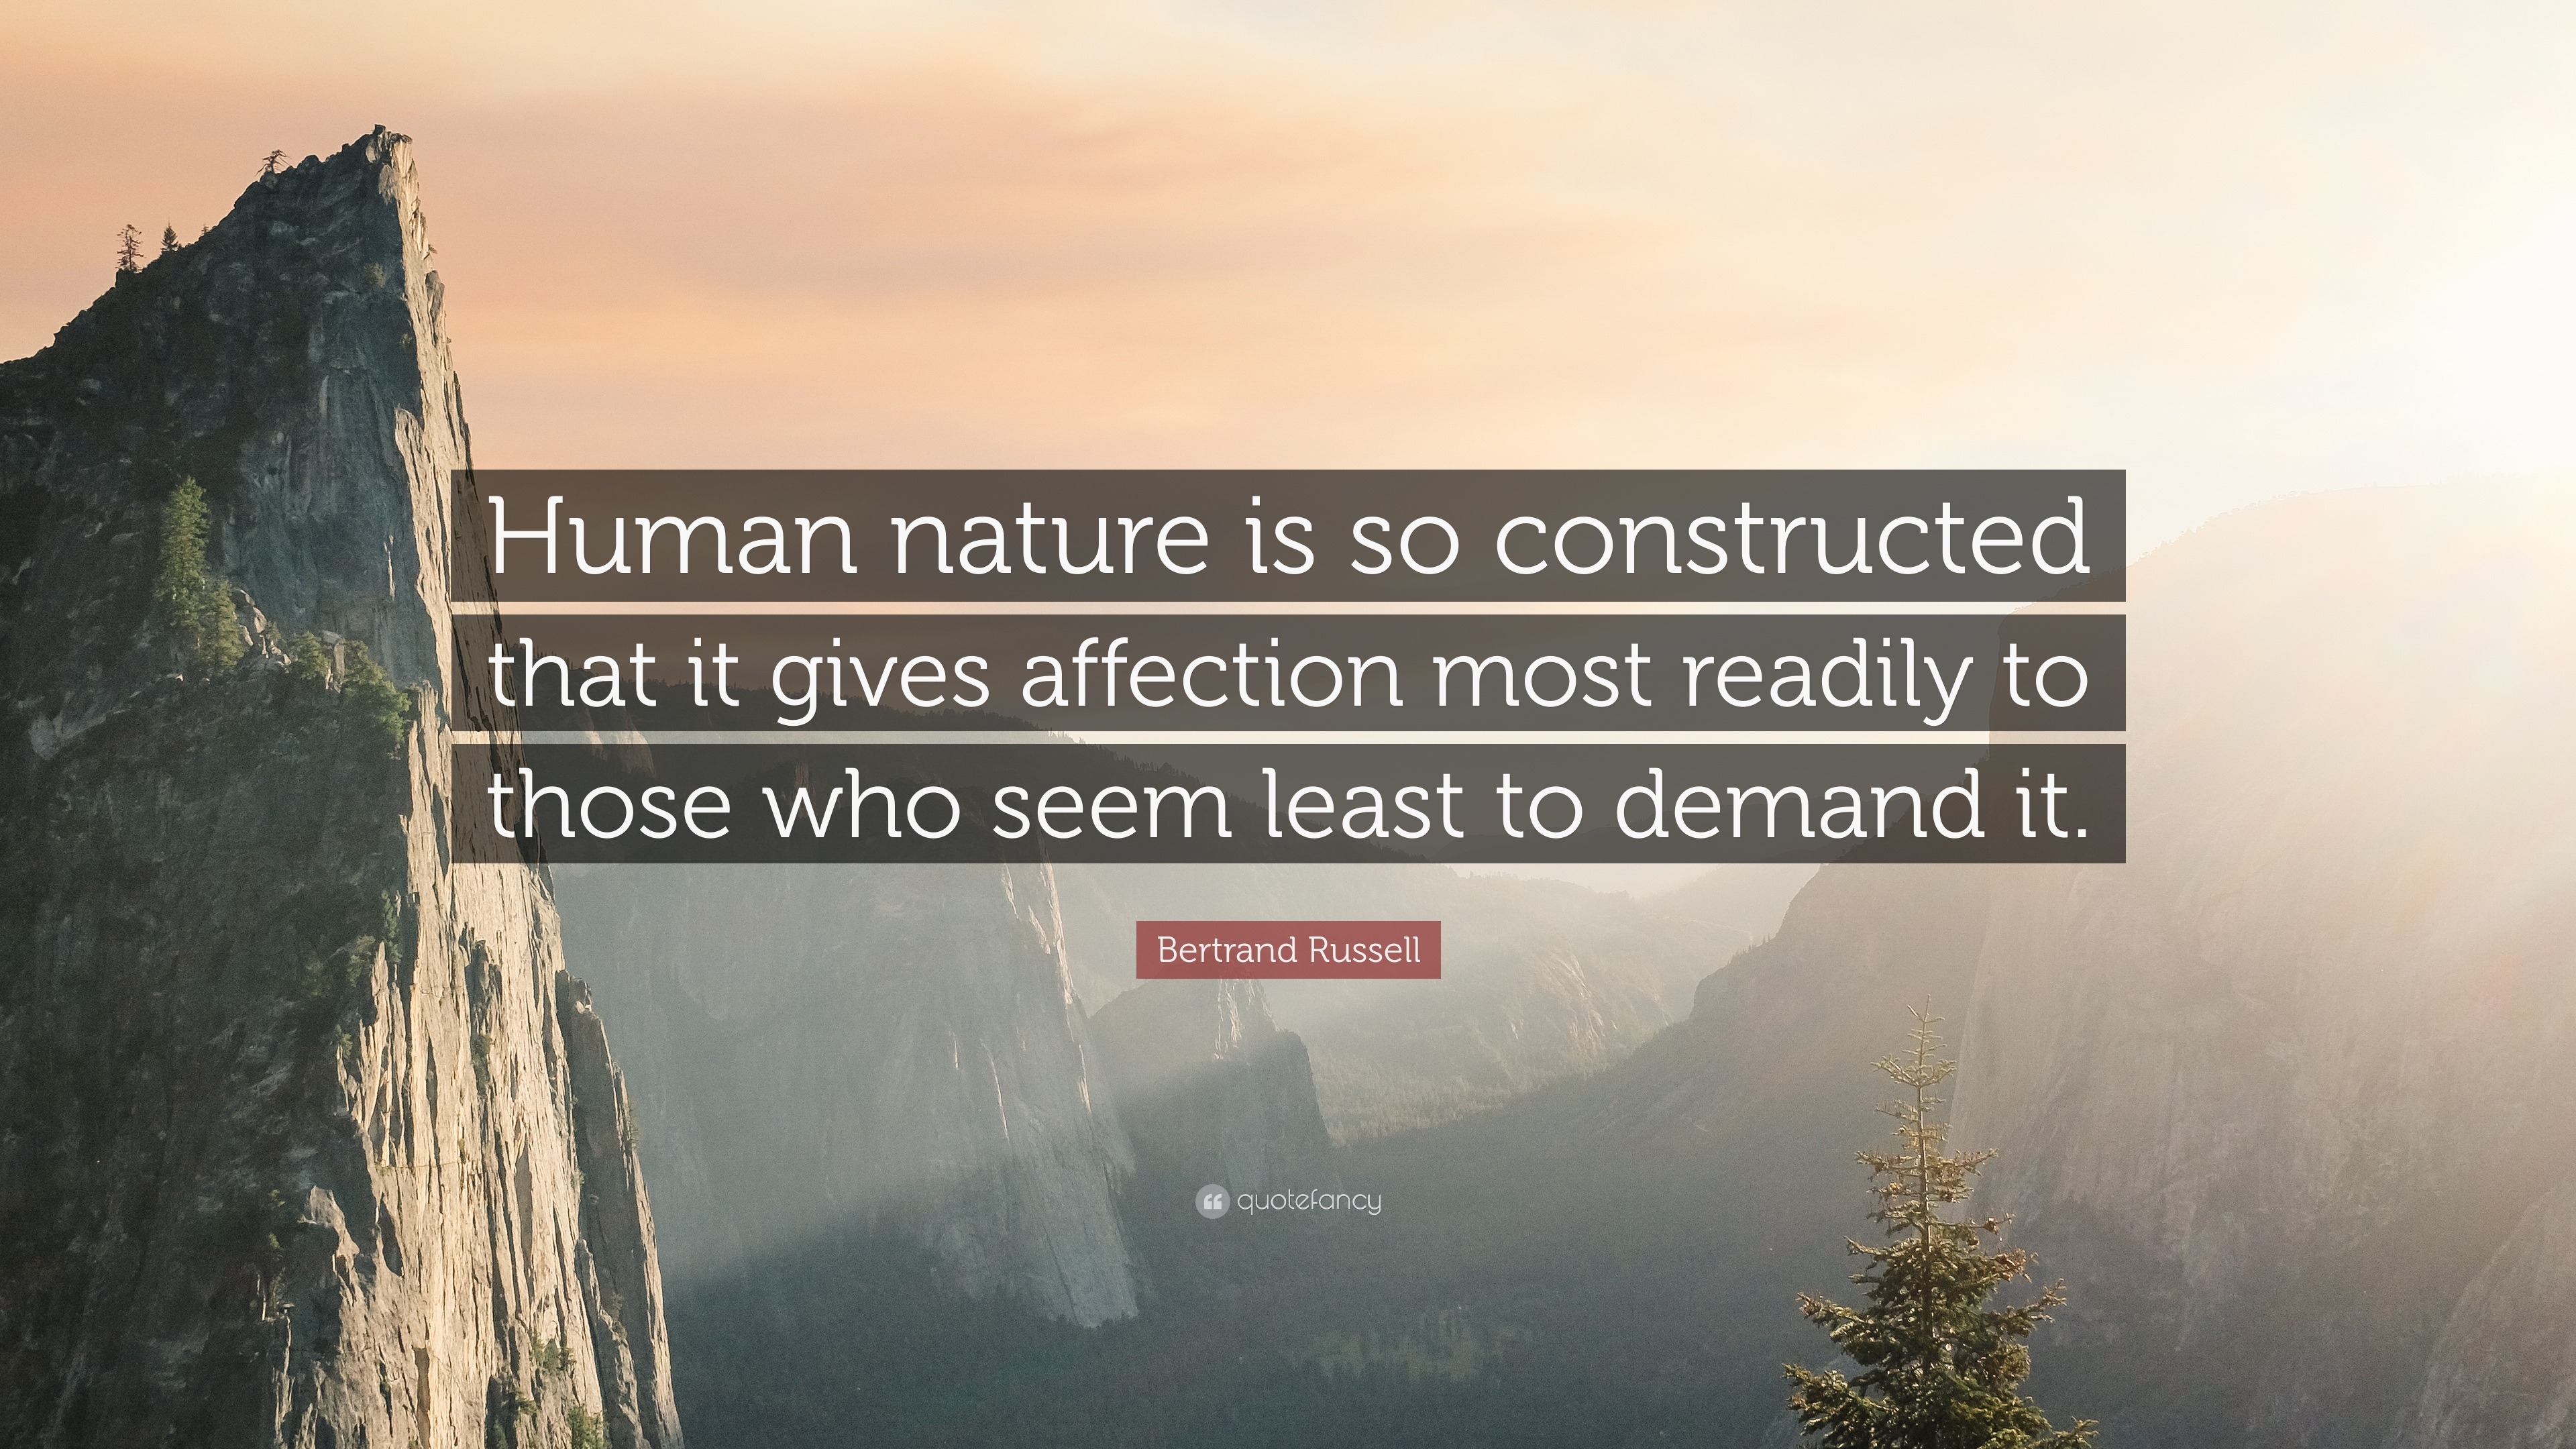 Bertrand Russell Quote: “Human is so constructed that it gives affection most readily to those